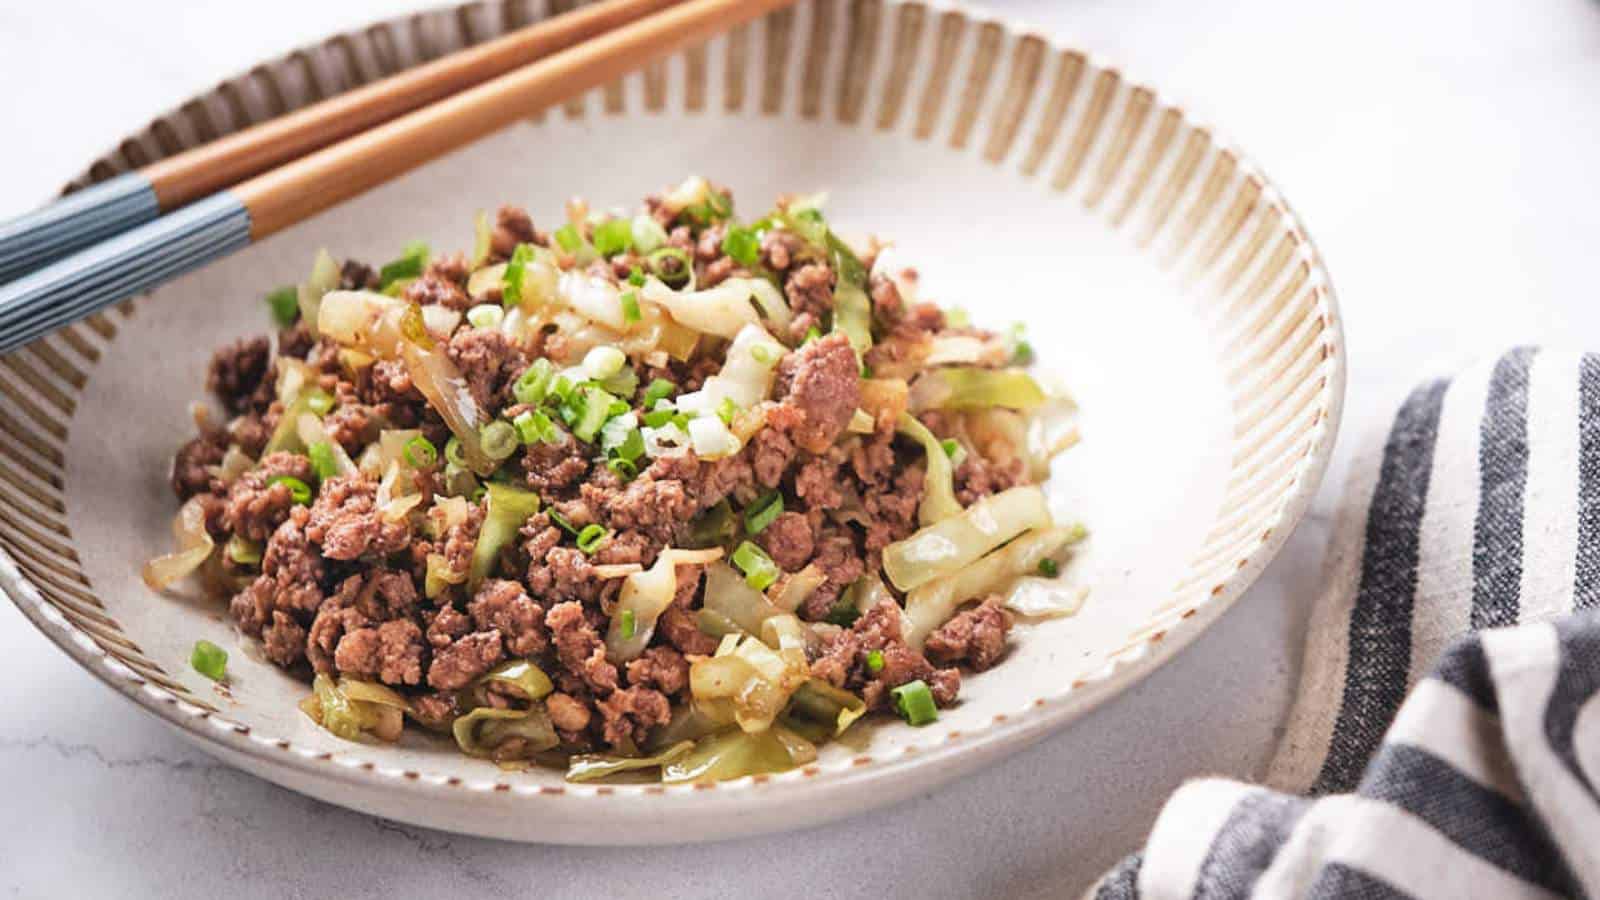 A plate of stir-fried minced meat with green onions, served with chopsticks on a marble countertop.